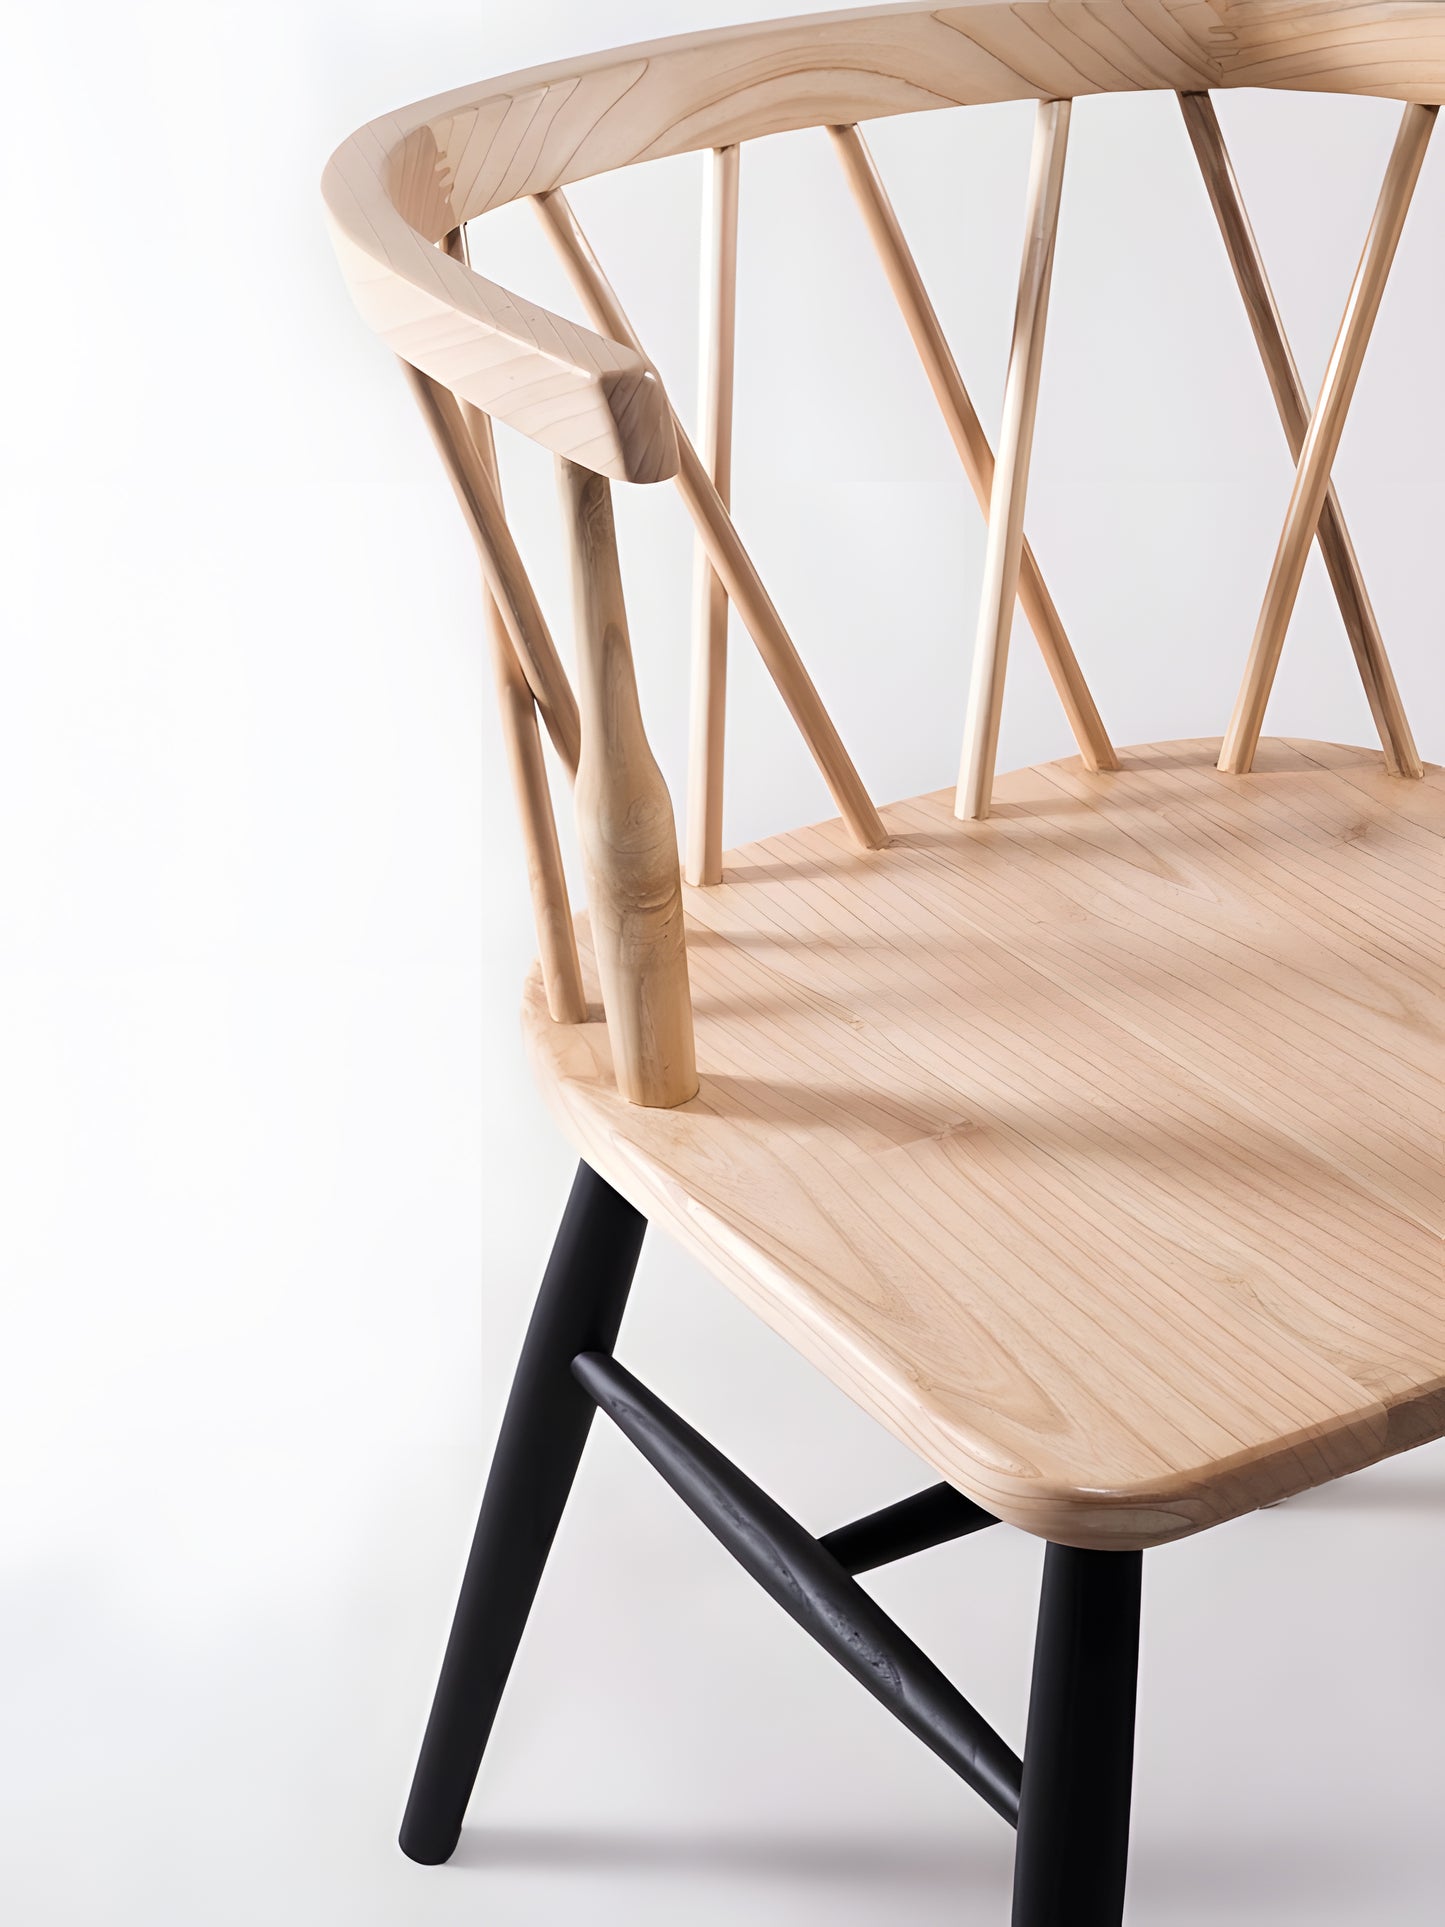 Fallas Sungkai Wood Cross Back Dining Chair with black painted legs detail view by Mellowdays Furniture